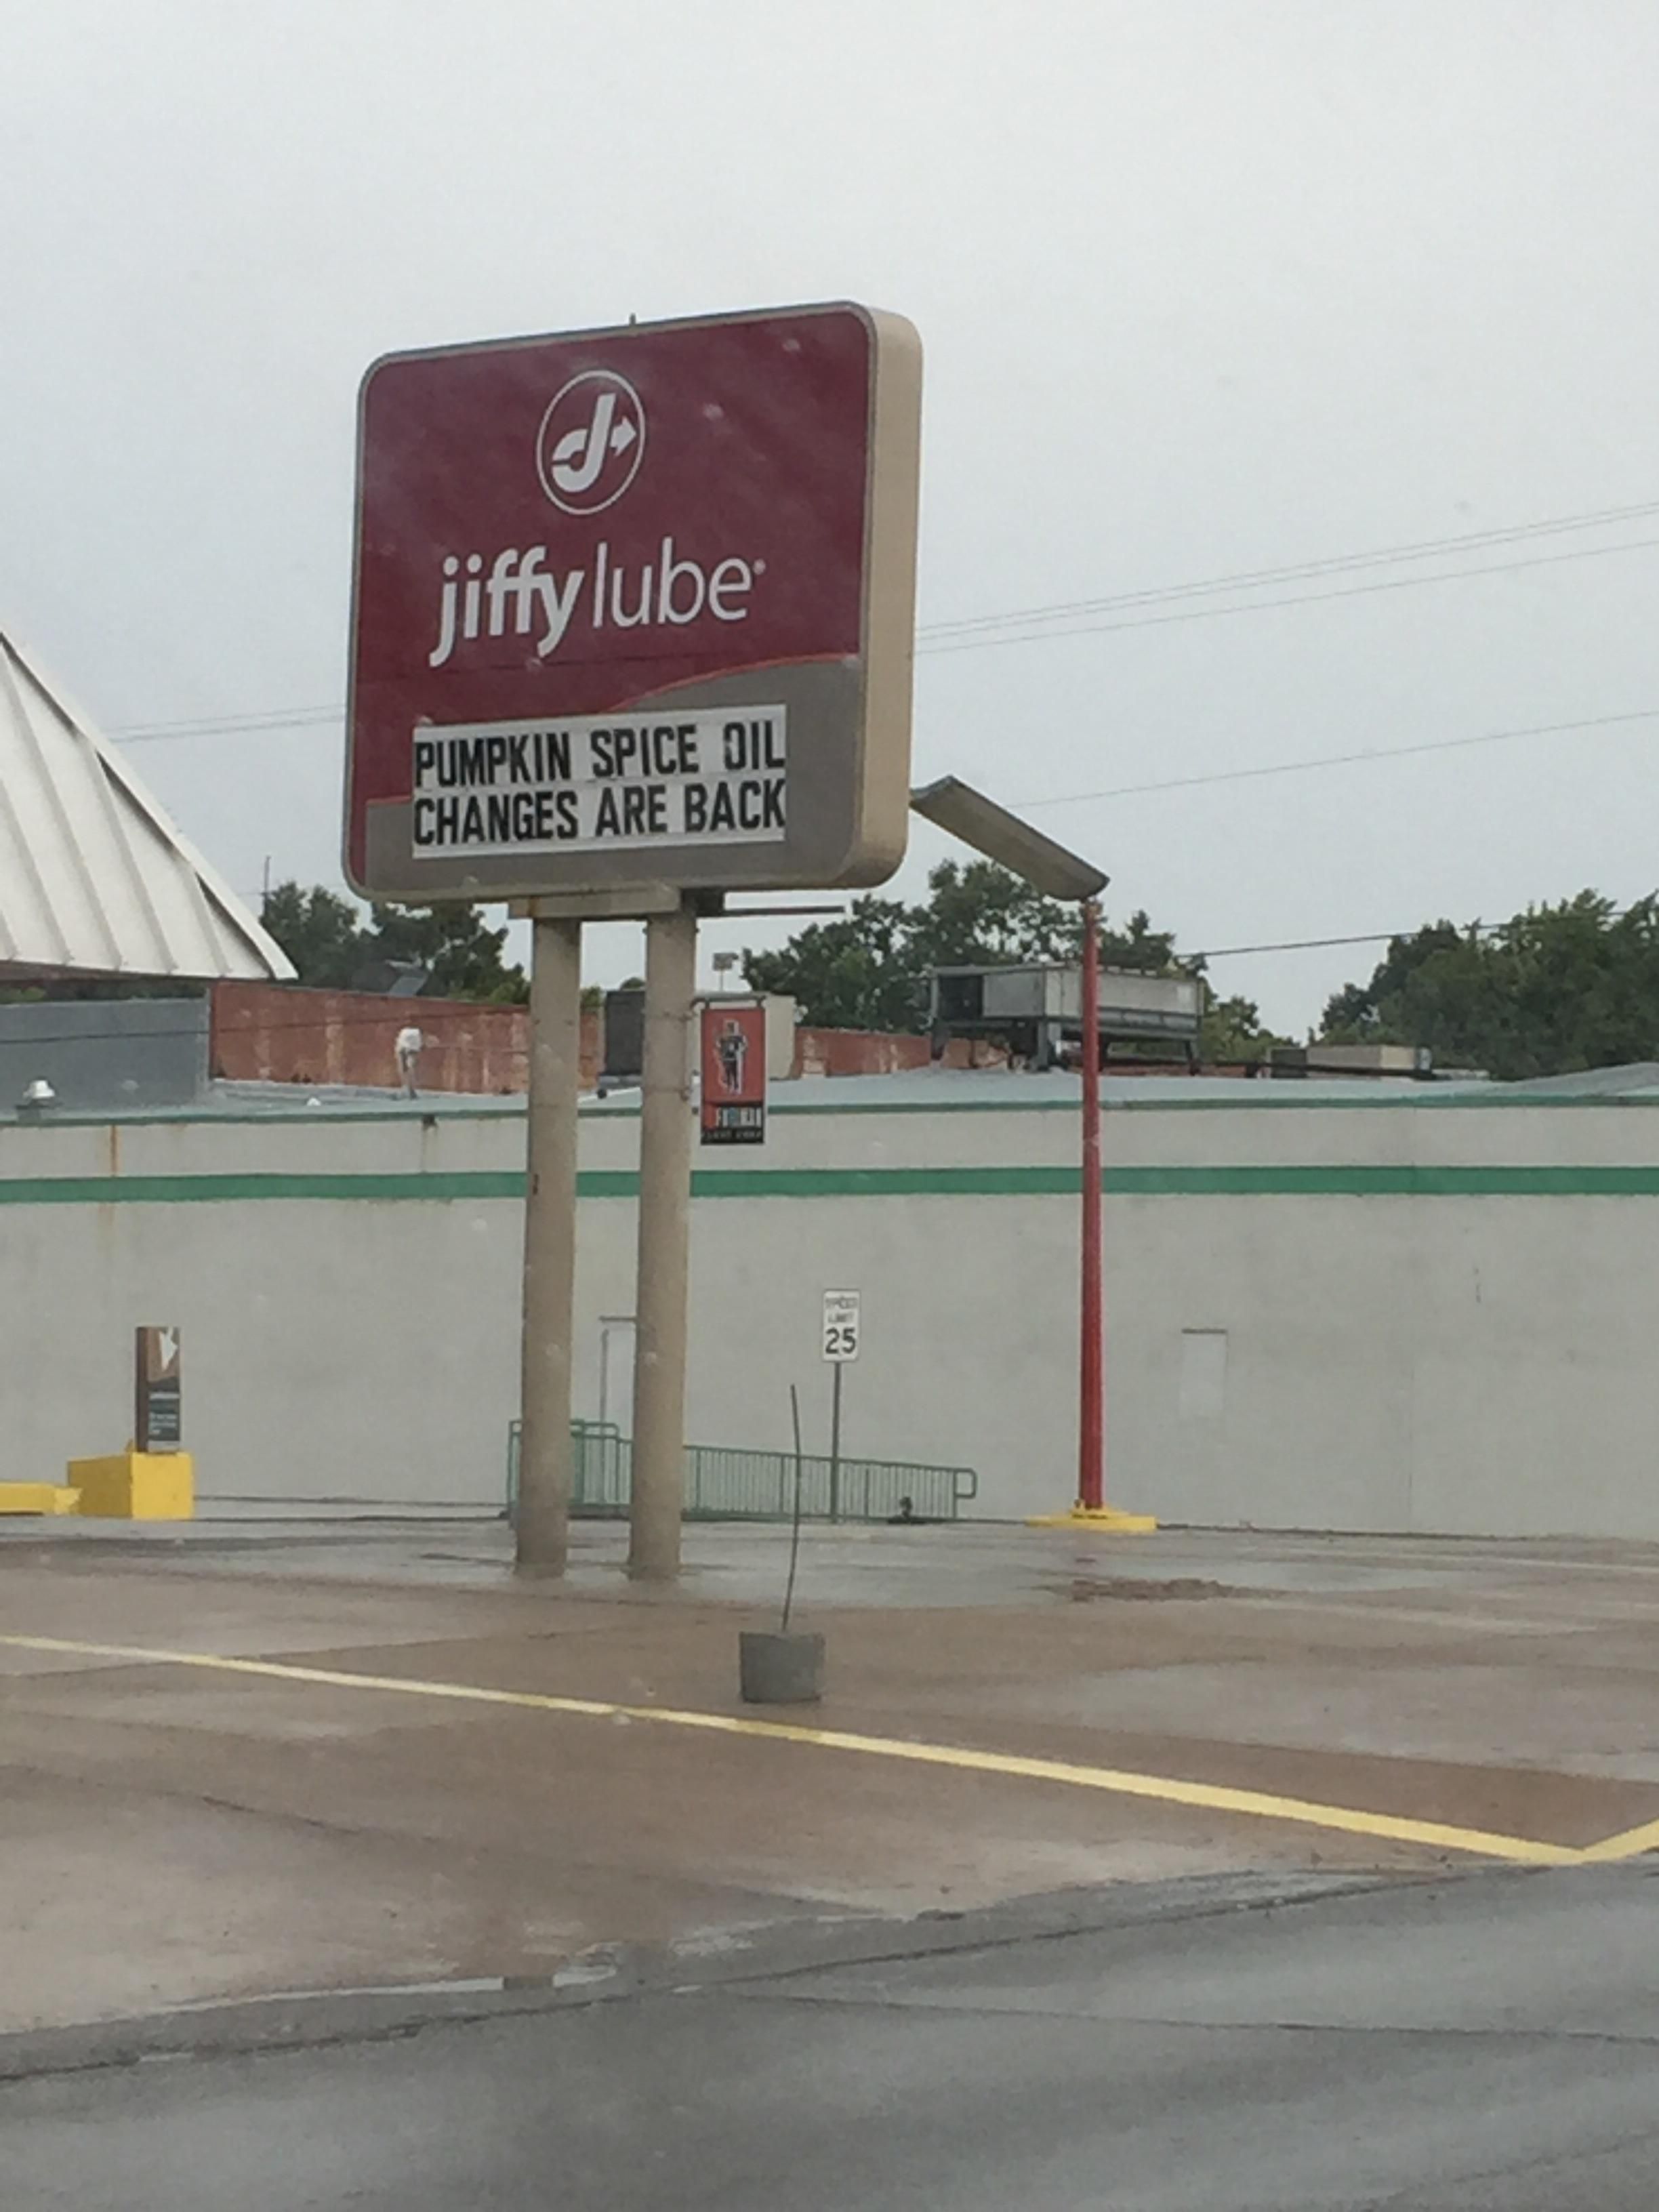 My local jiffy lube y'all